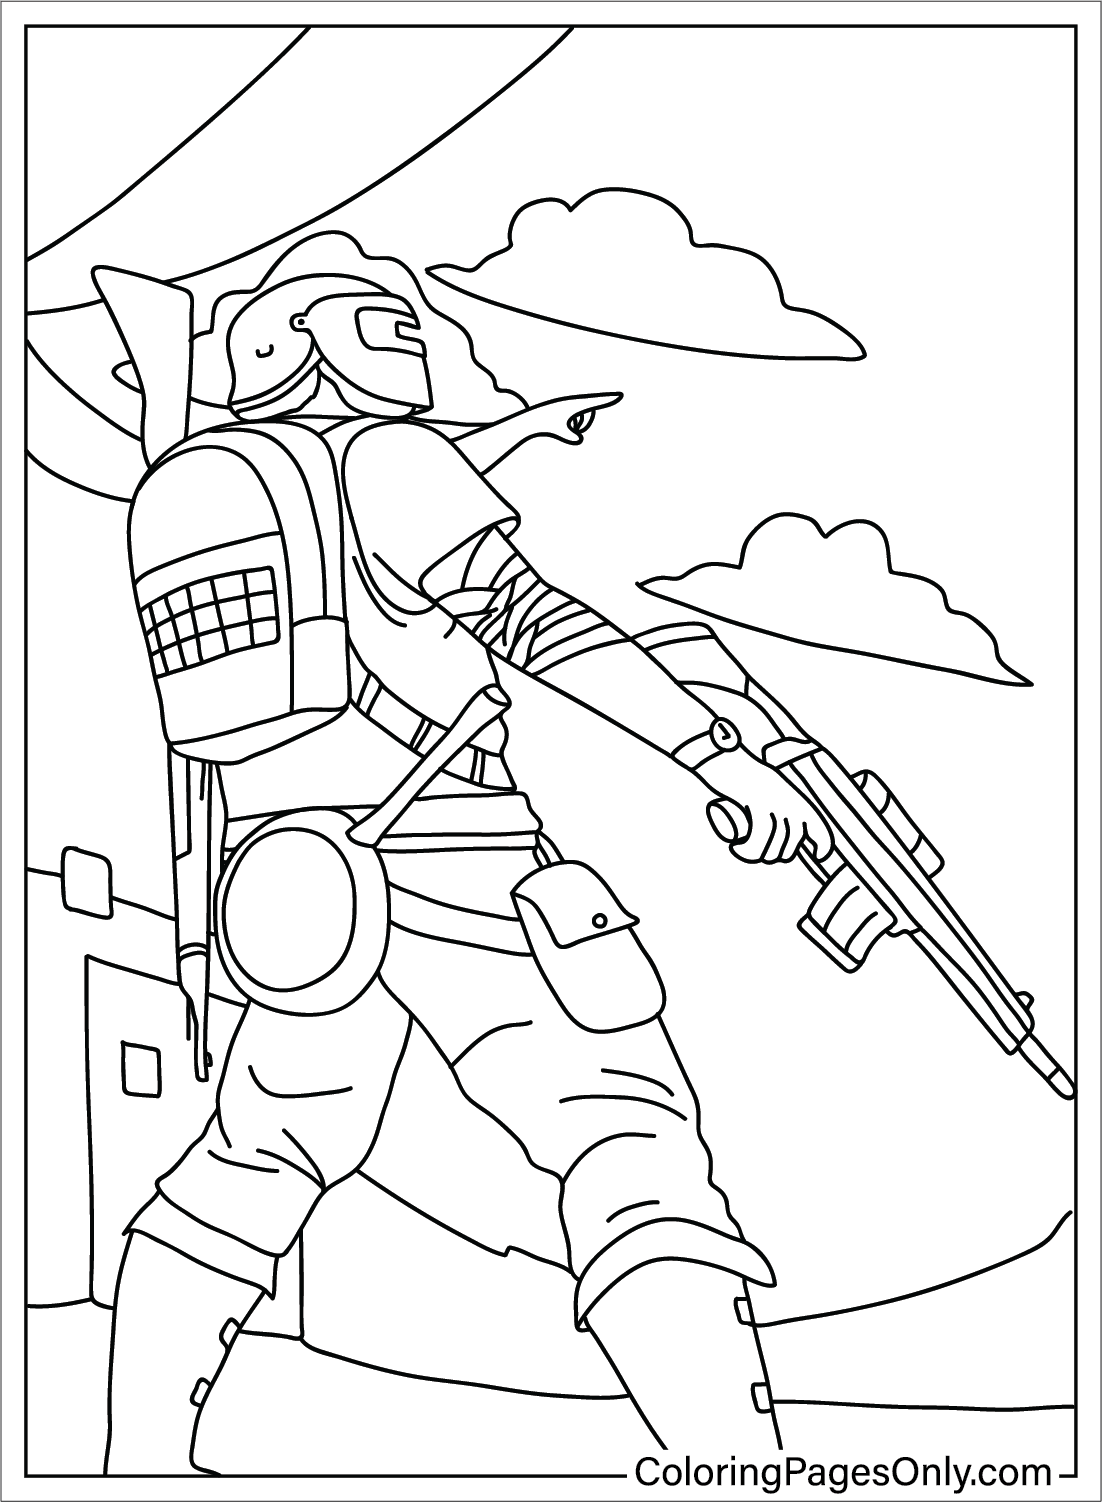 Pubg Coloring Page for Adults from PUBG